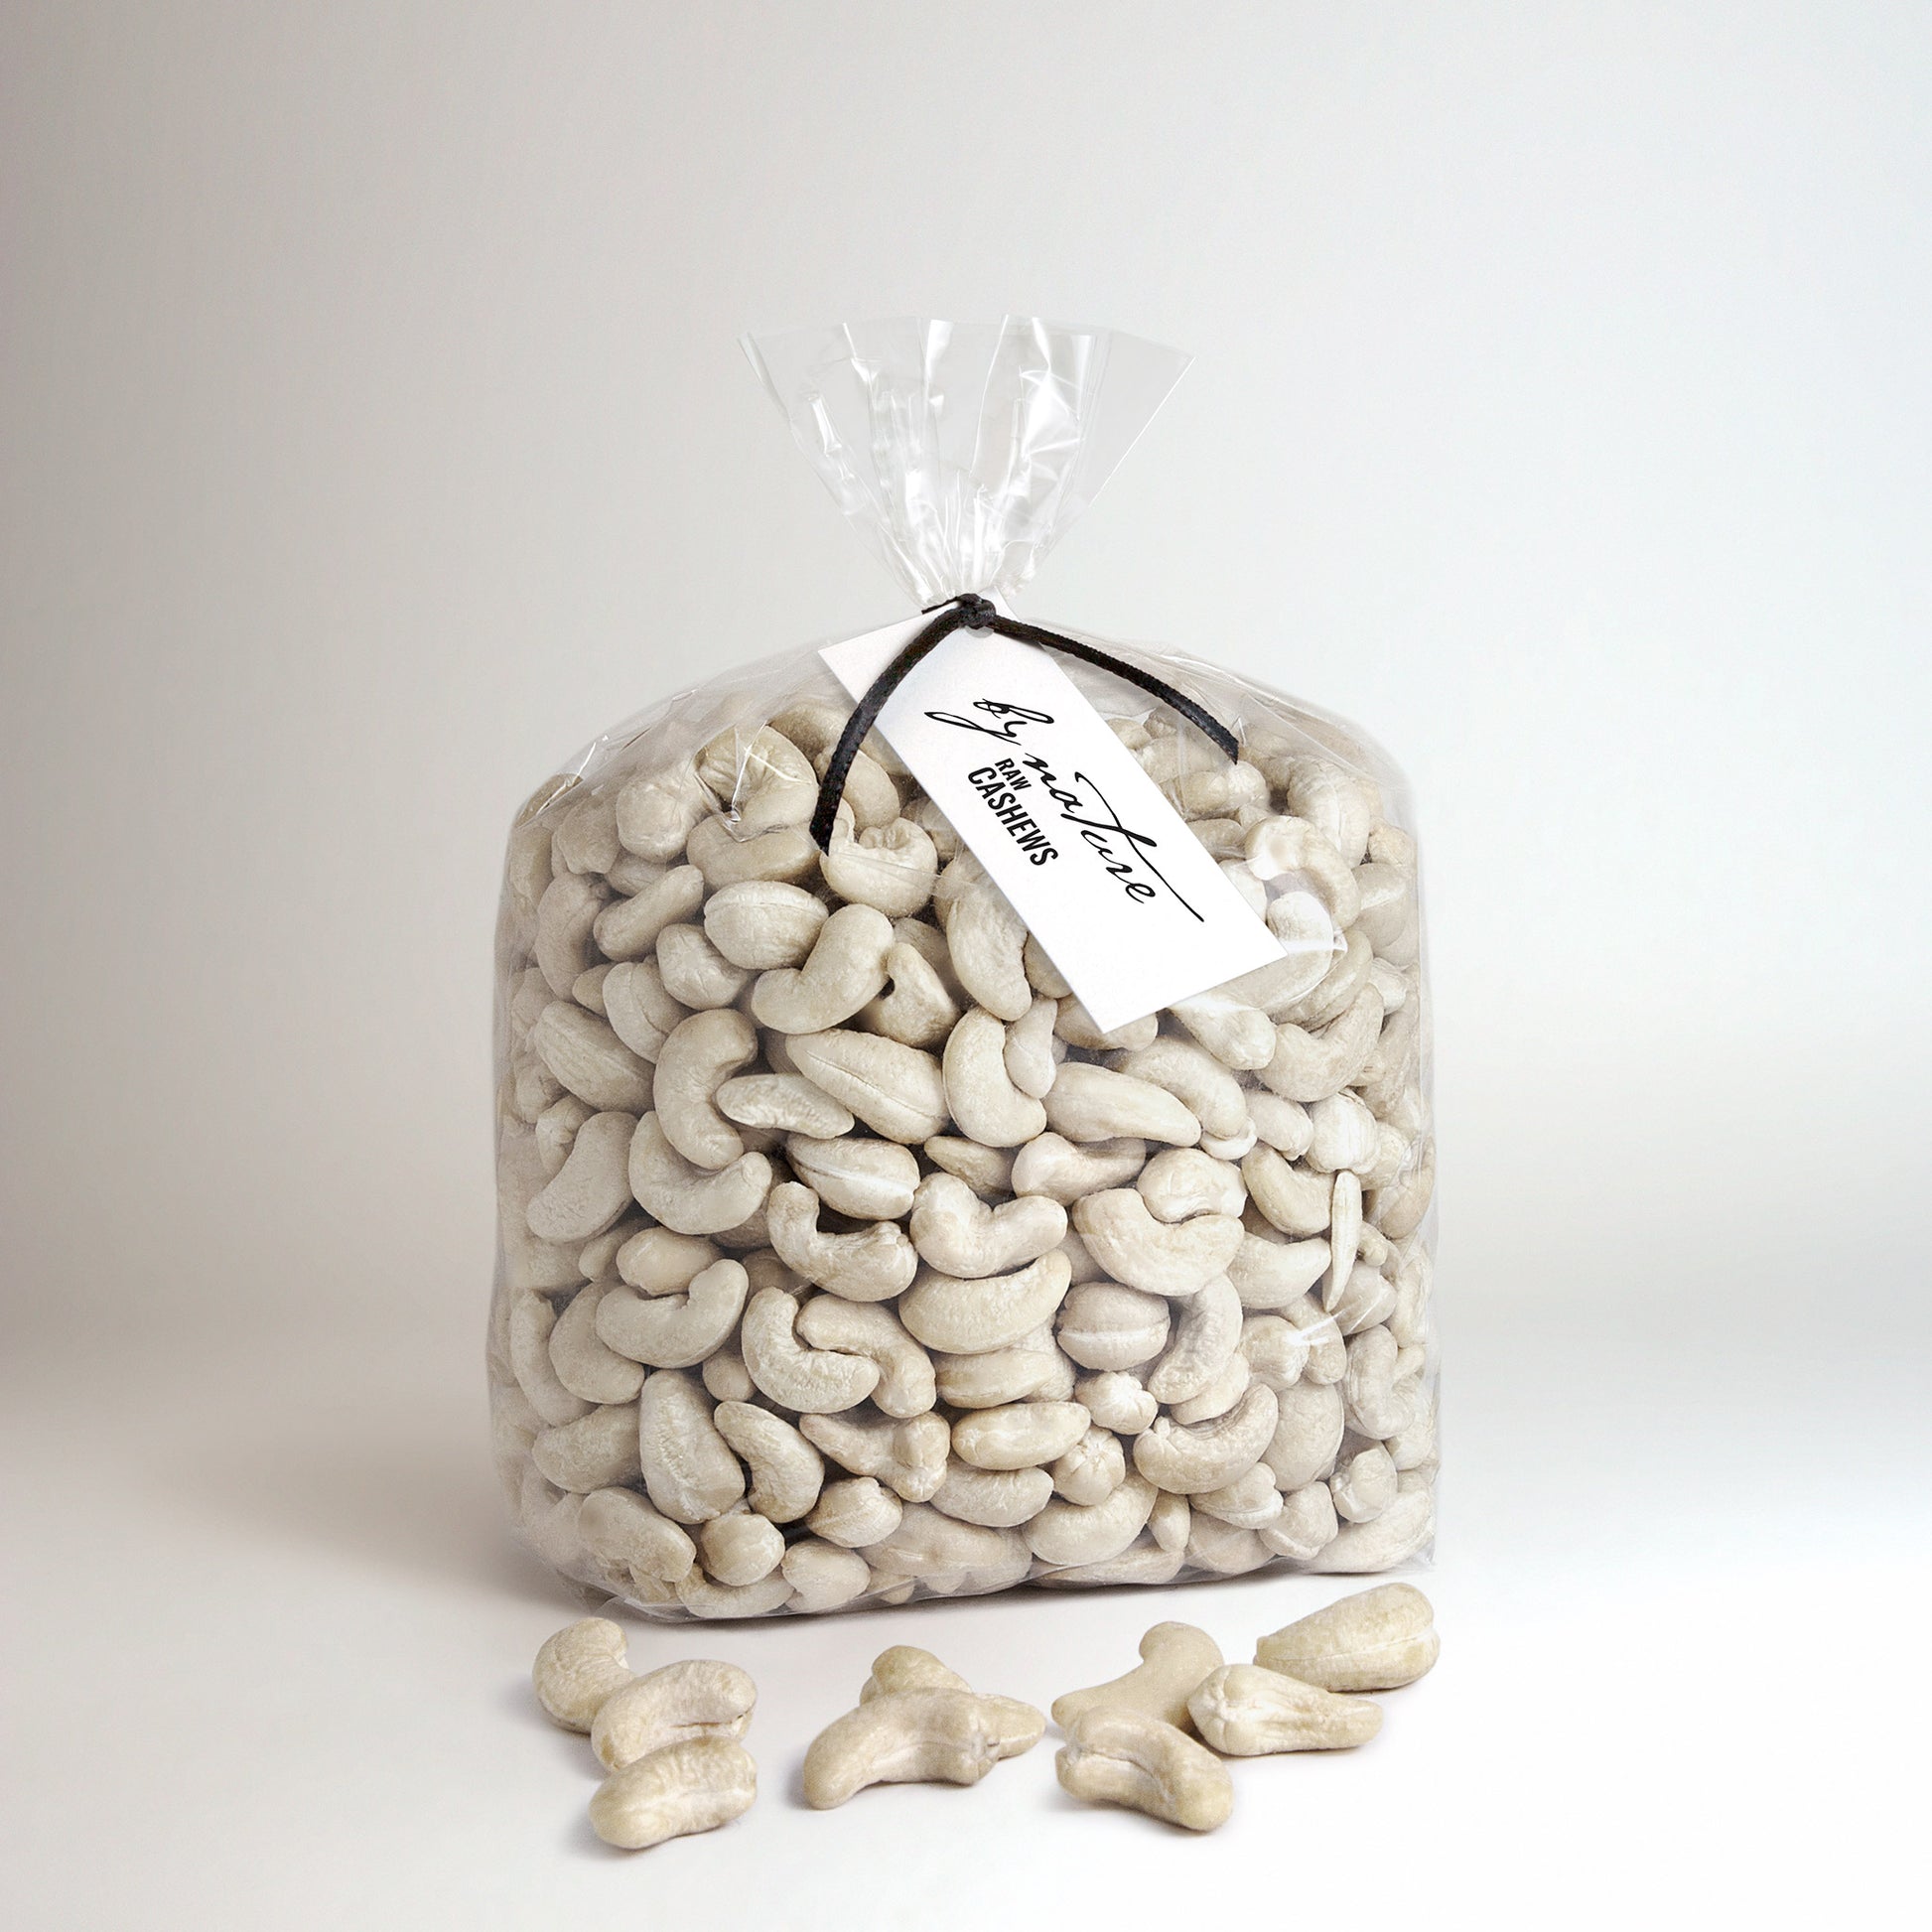 BY NATURE Cashew Nuts, 1kg - raw.